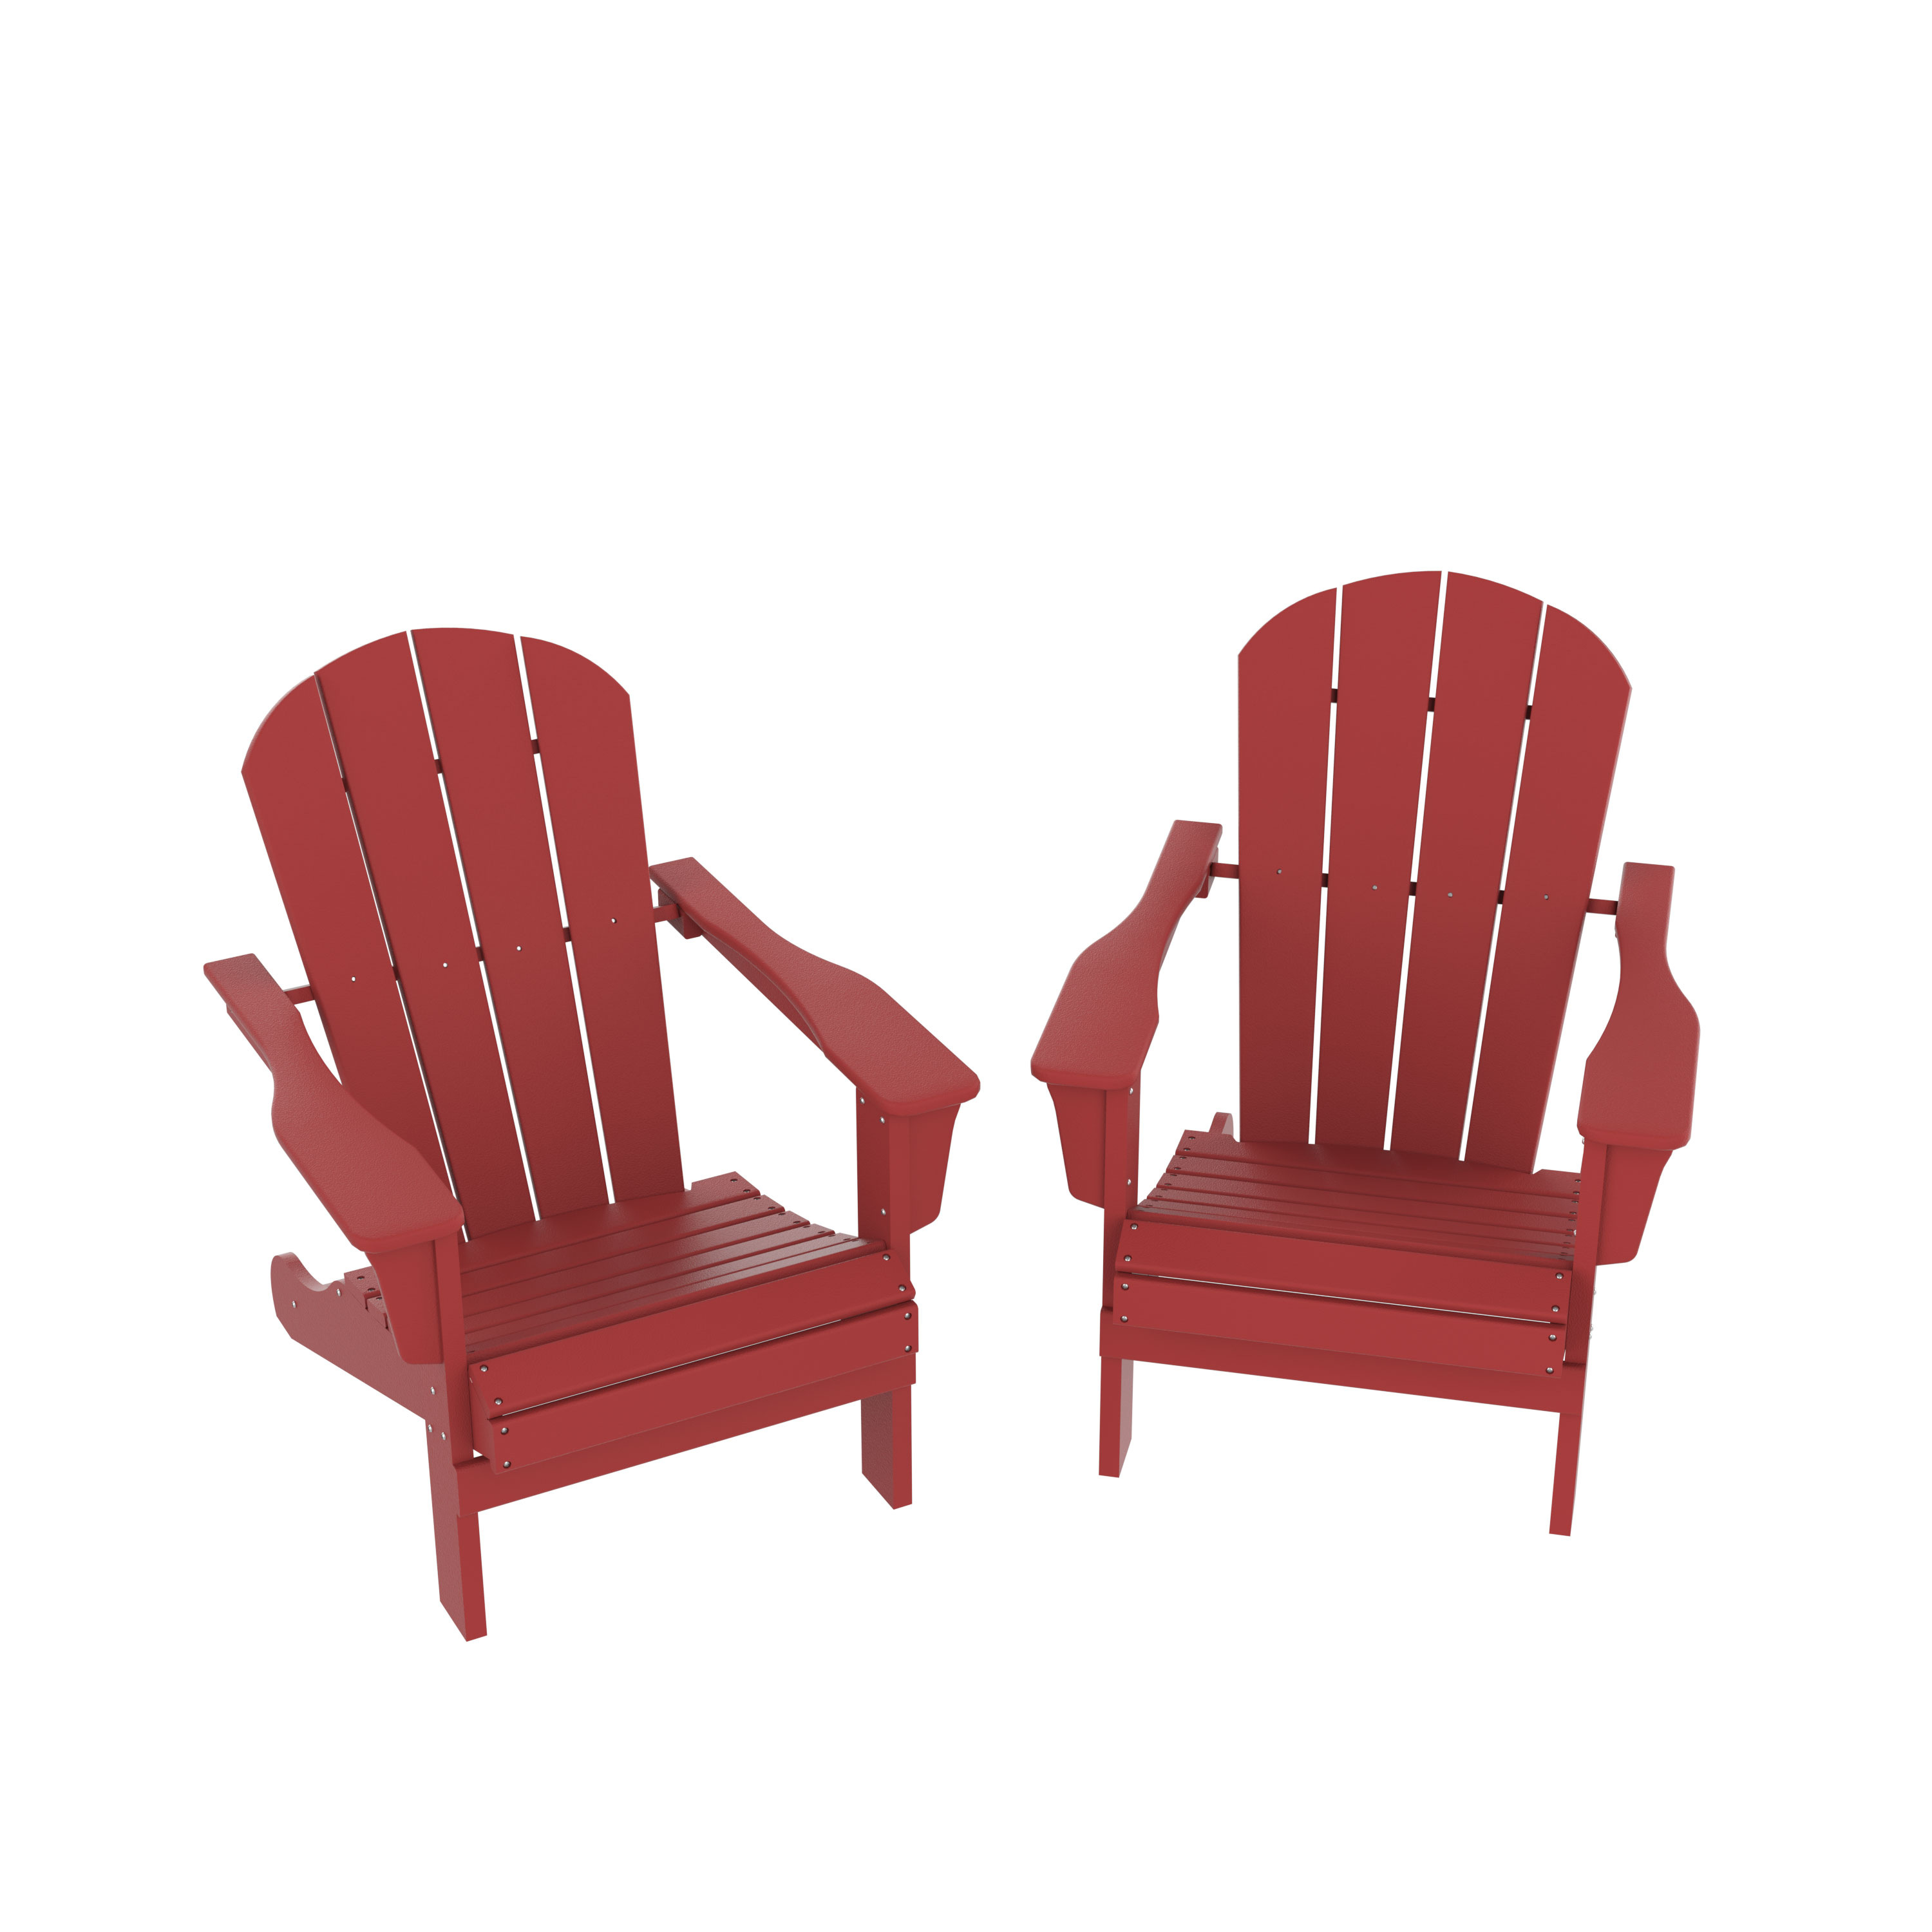 Sportaza HDPE Chair, Fire Pit Chairs, Sand Chair, Patio Outdoor Chairs,DPE Plastic Resin Deck Chair, lawn chairs, Adult Size ,Weather Resistant for Patio/ Backyard/Garden, Red, Set of 2 - image 2 of 6